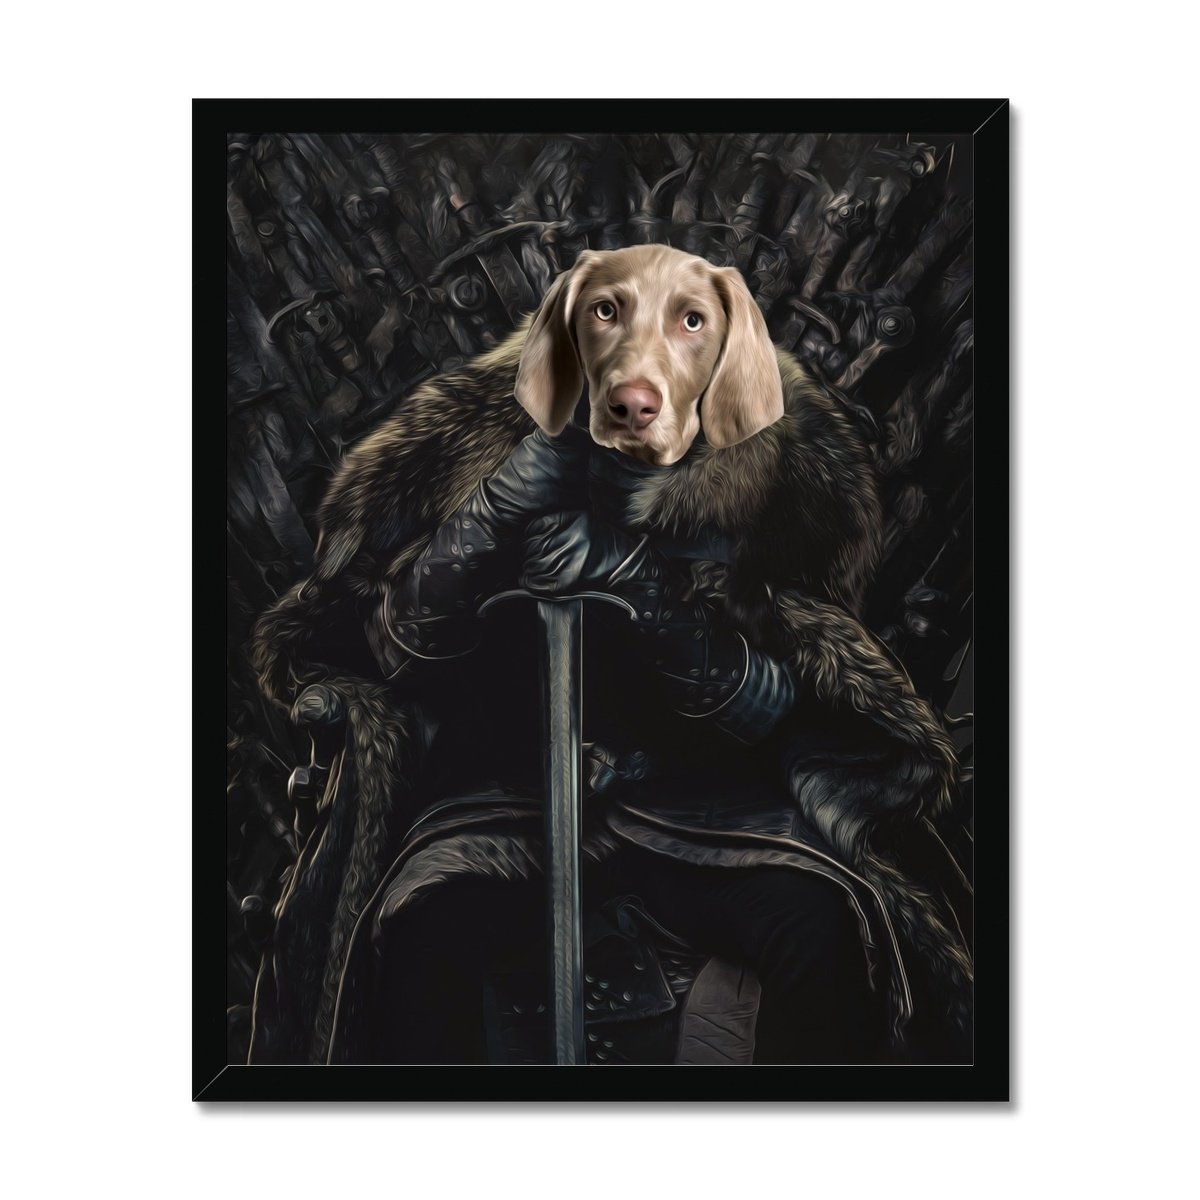 The Night King: Custom Framed Pet Portrait - Paw & Glory, paw and glory, paintings of pets from photos, cat picture painting, original pet portraits, pet portraits usa, dog portrait images, hogwarts dog houses, pet portraits